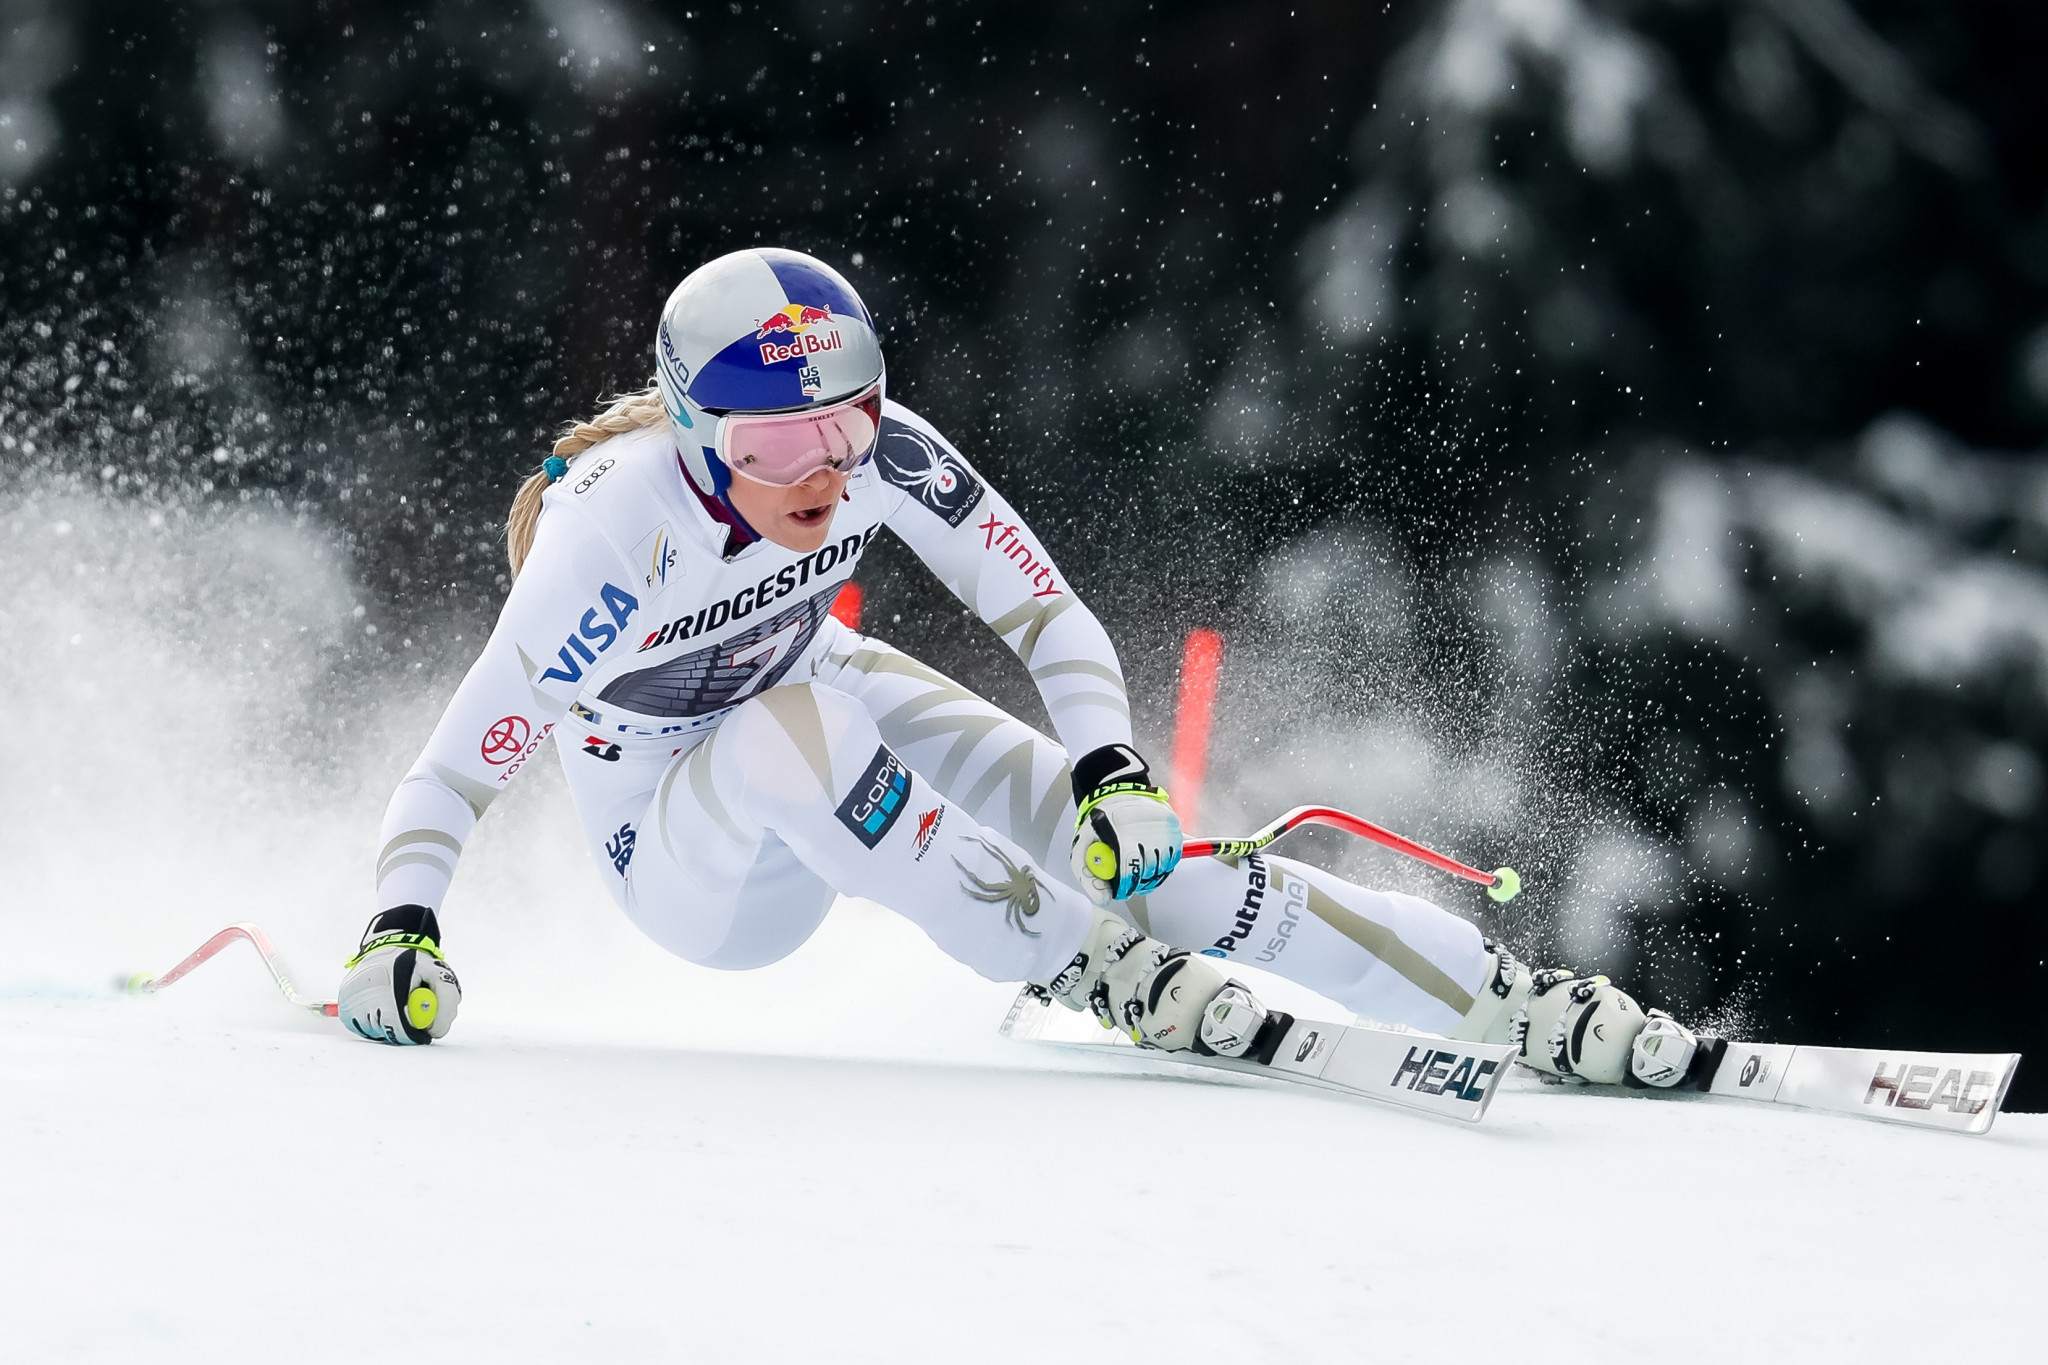 Lindsey Vonn has 82 World Cup victories to her name ©Getty Images